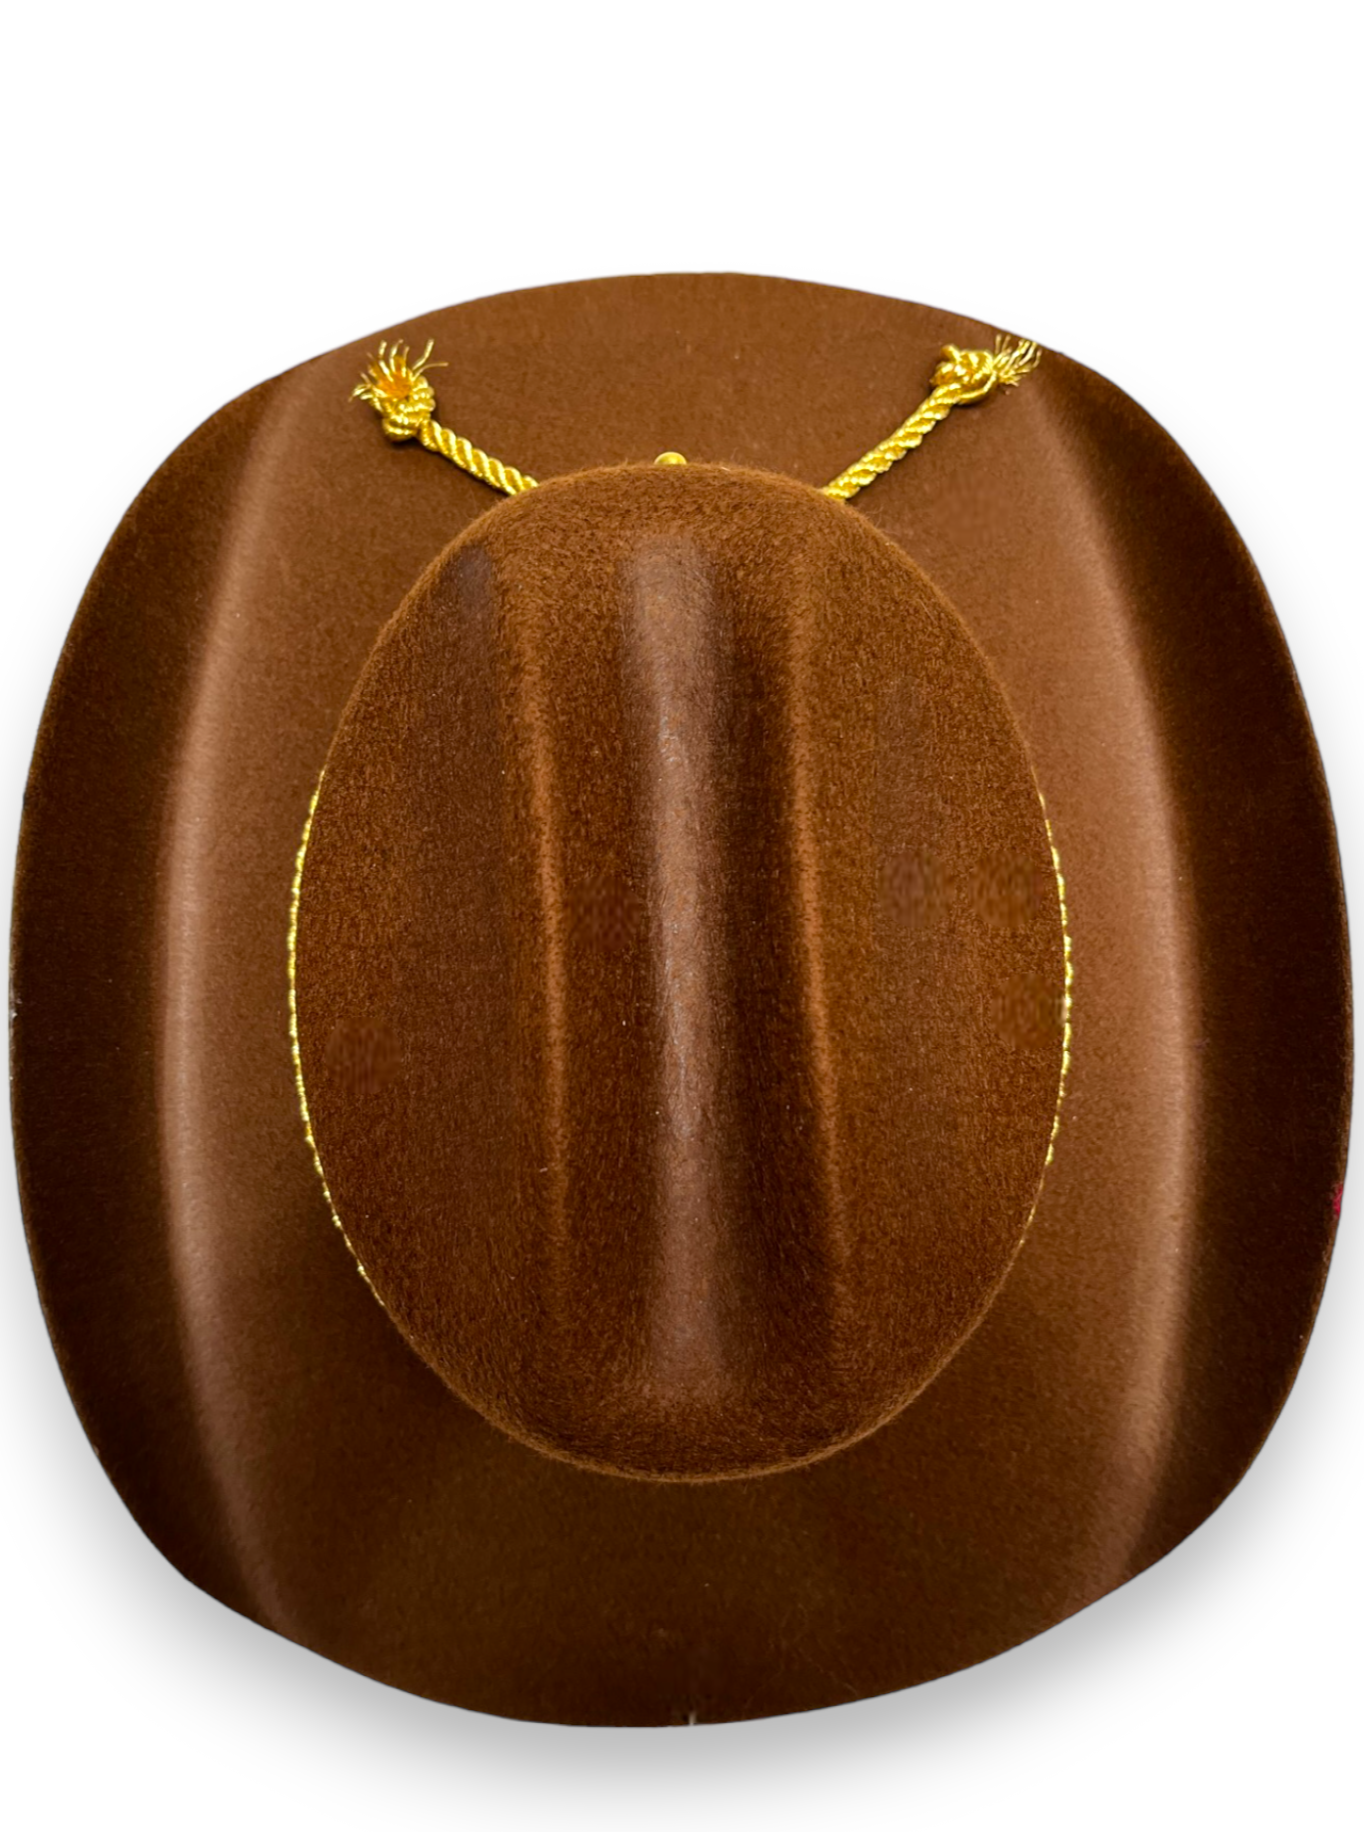 NEW with Tags - Brown Stetson Cowboy Sheriff Hat